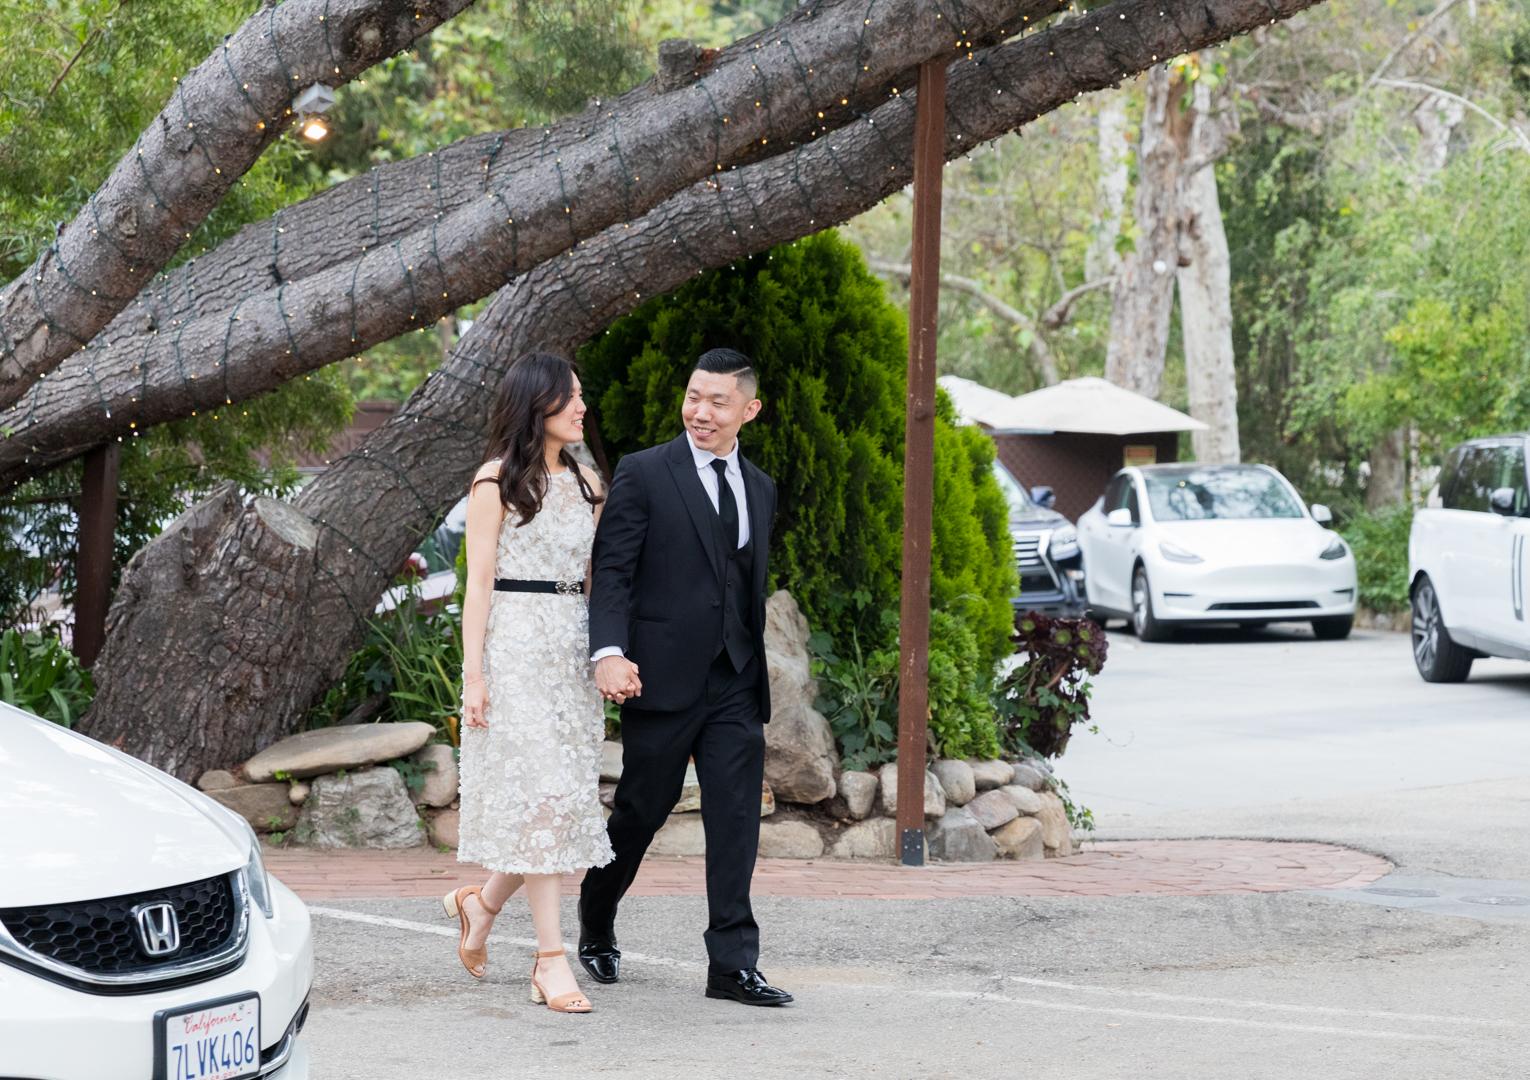 The Wedding Website of Sulynn Jin and Alex Hong